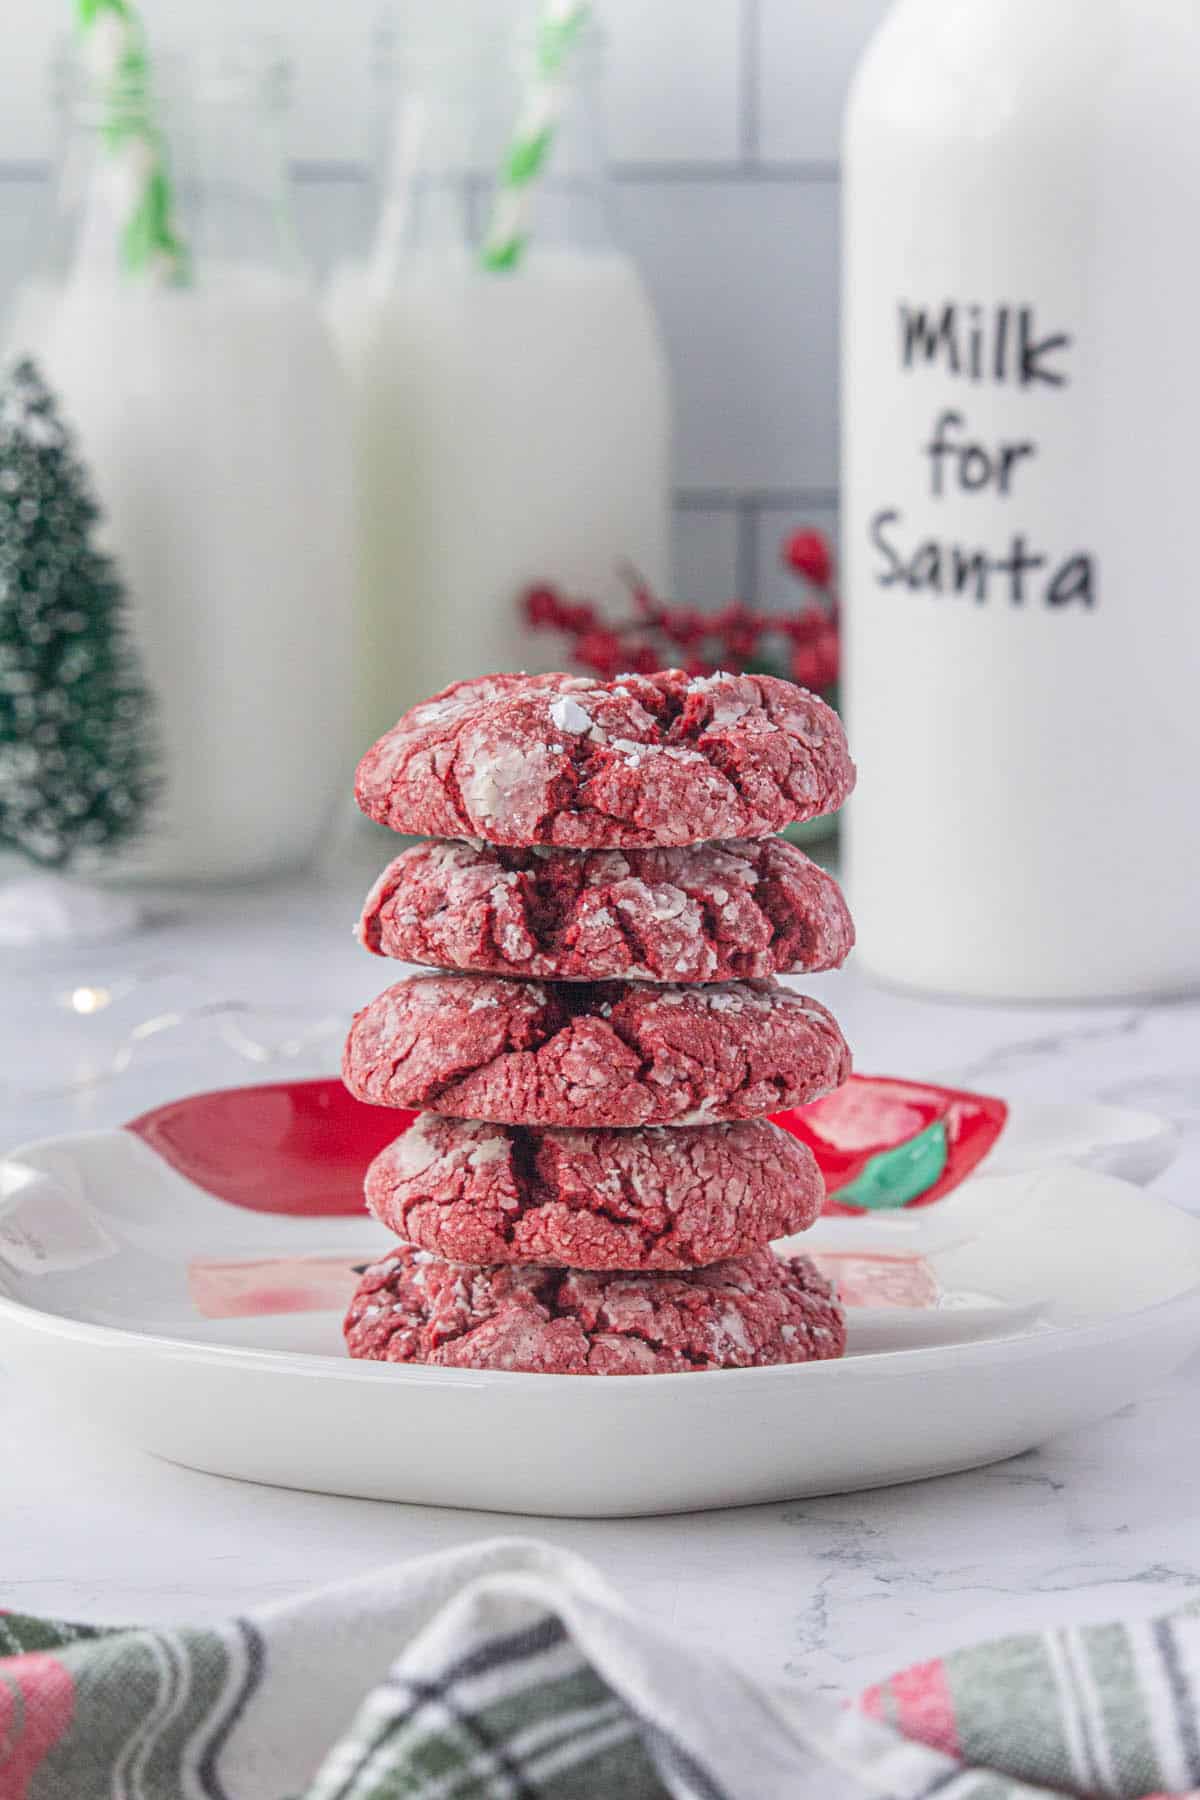 A stack of Red Velvet Crinkle Cookies on a holiday platter with glasses of milk for Santa in the background.